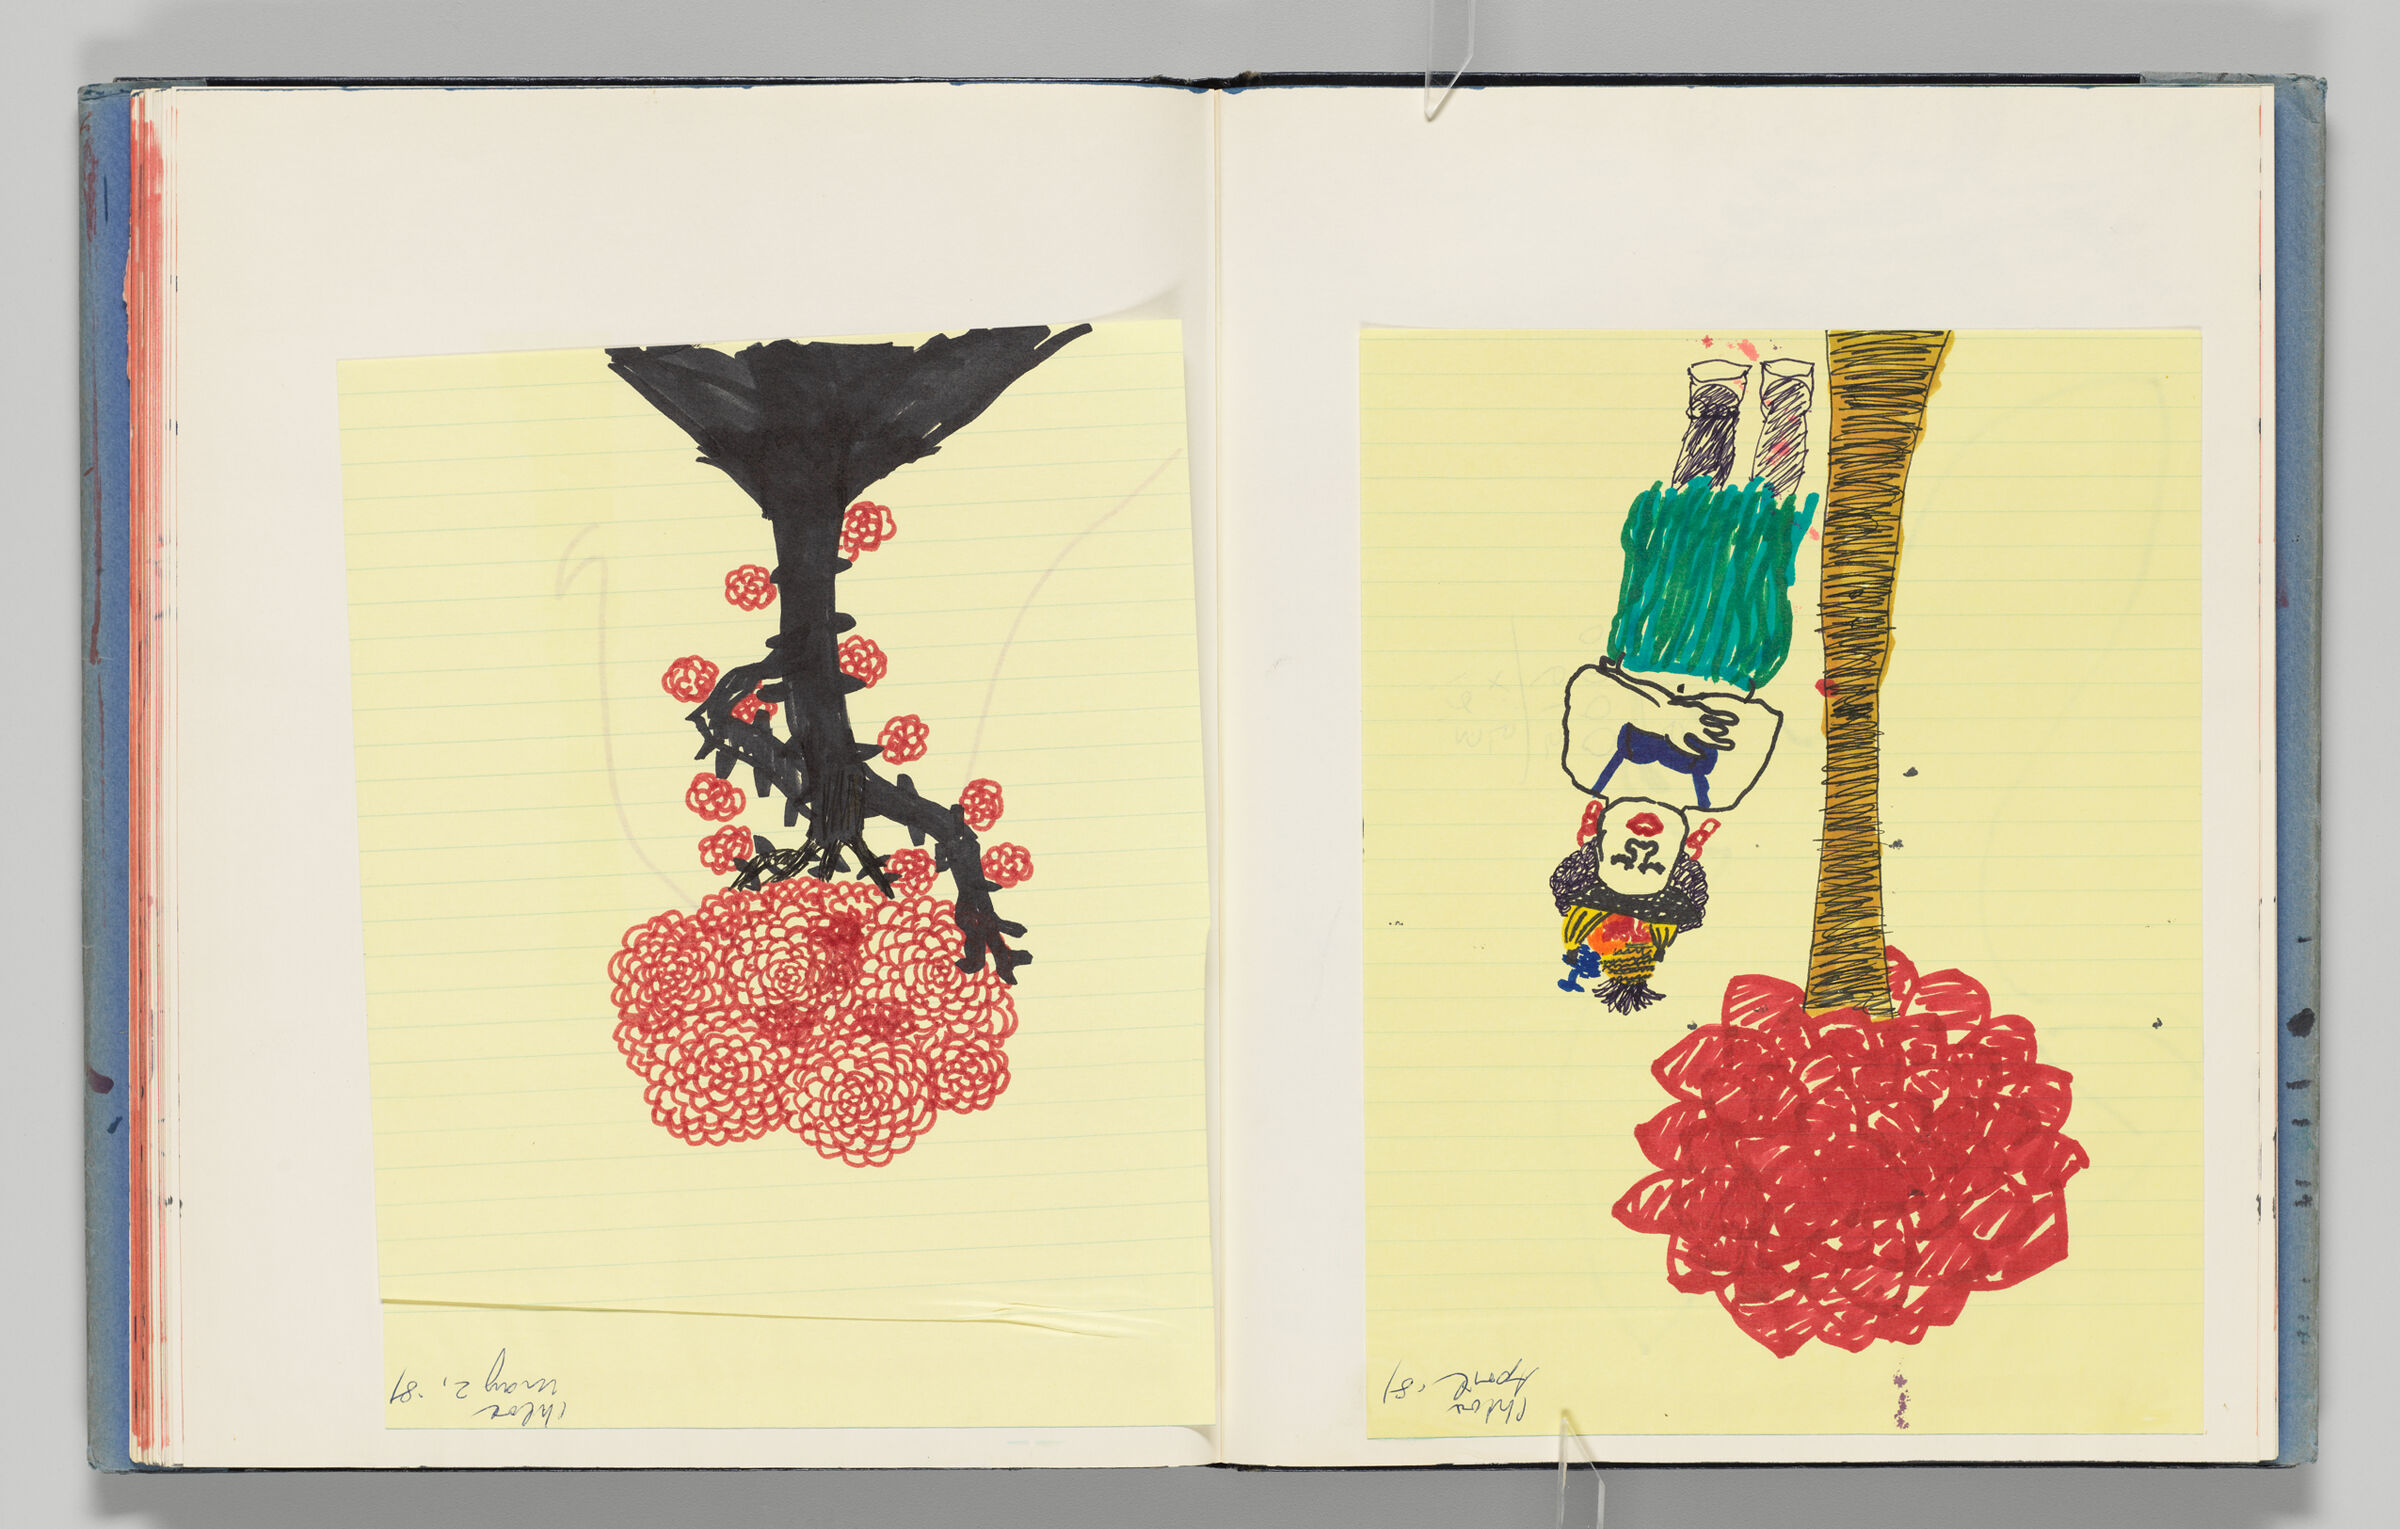 Untitled (Adhered Sketch By Artist's Daughter On Sheet Of Legal Paper, Left Page); Untitled (Adhered Sketch By Artist's Daughter On Sheet Of Legal Paper, Right Page)